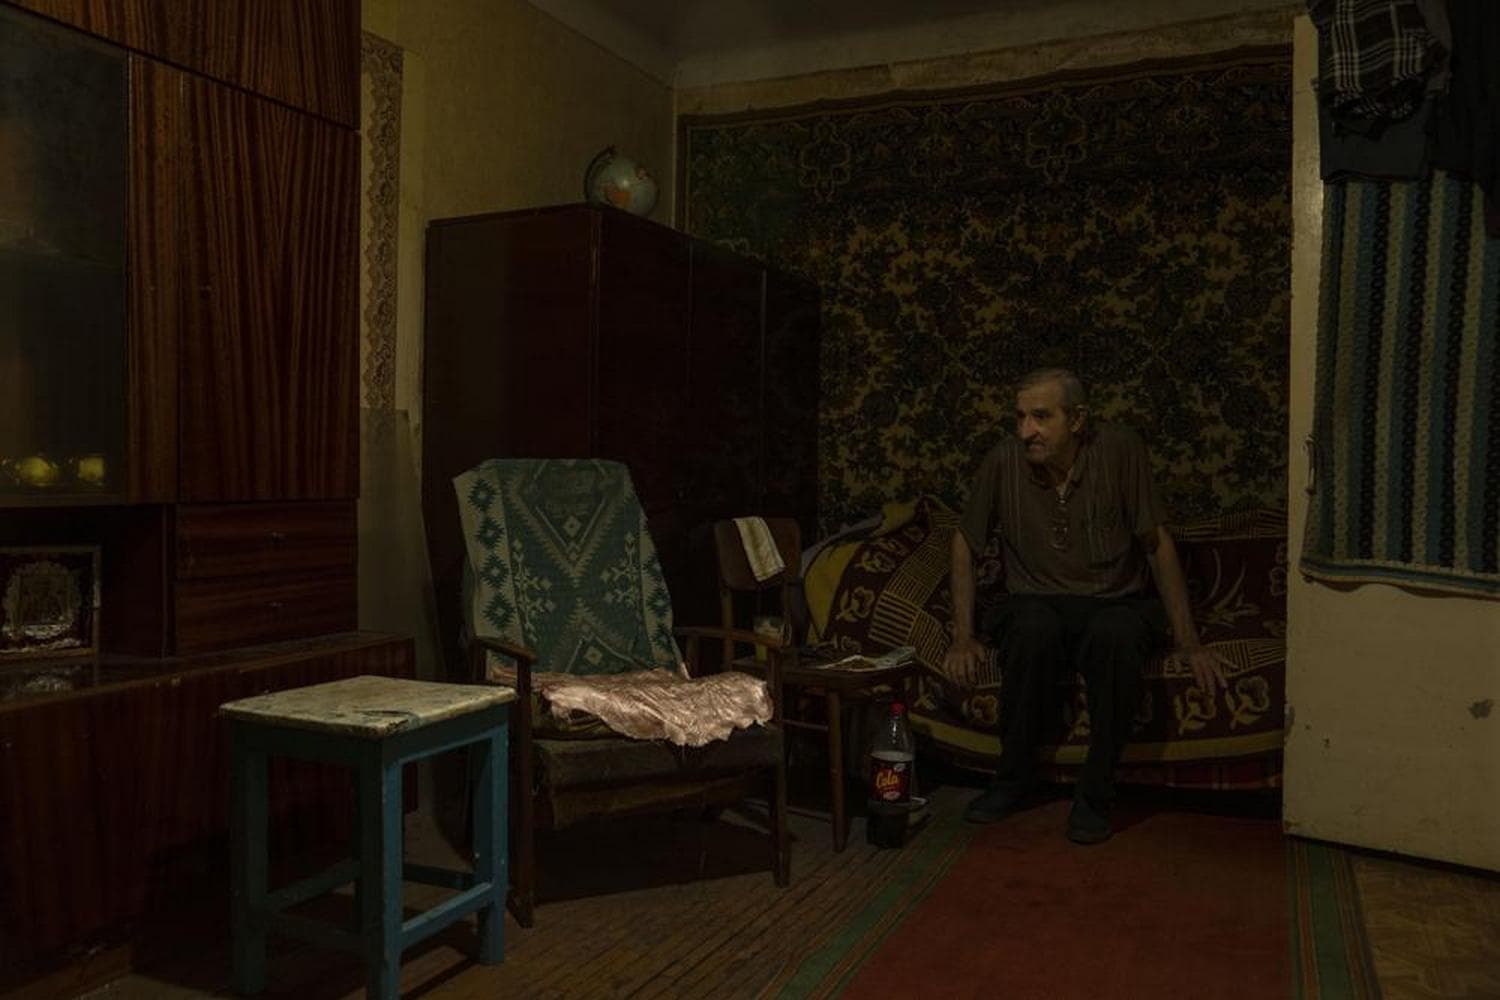 Seventy-year-old pensioner Valerii Ilchenko, who lives alone and is refusing to evacuate, sits on his couch and bed in his apartment, in Kramatorsk